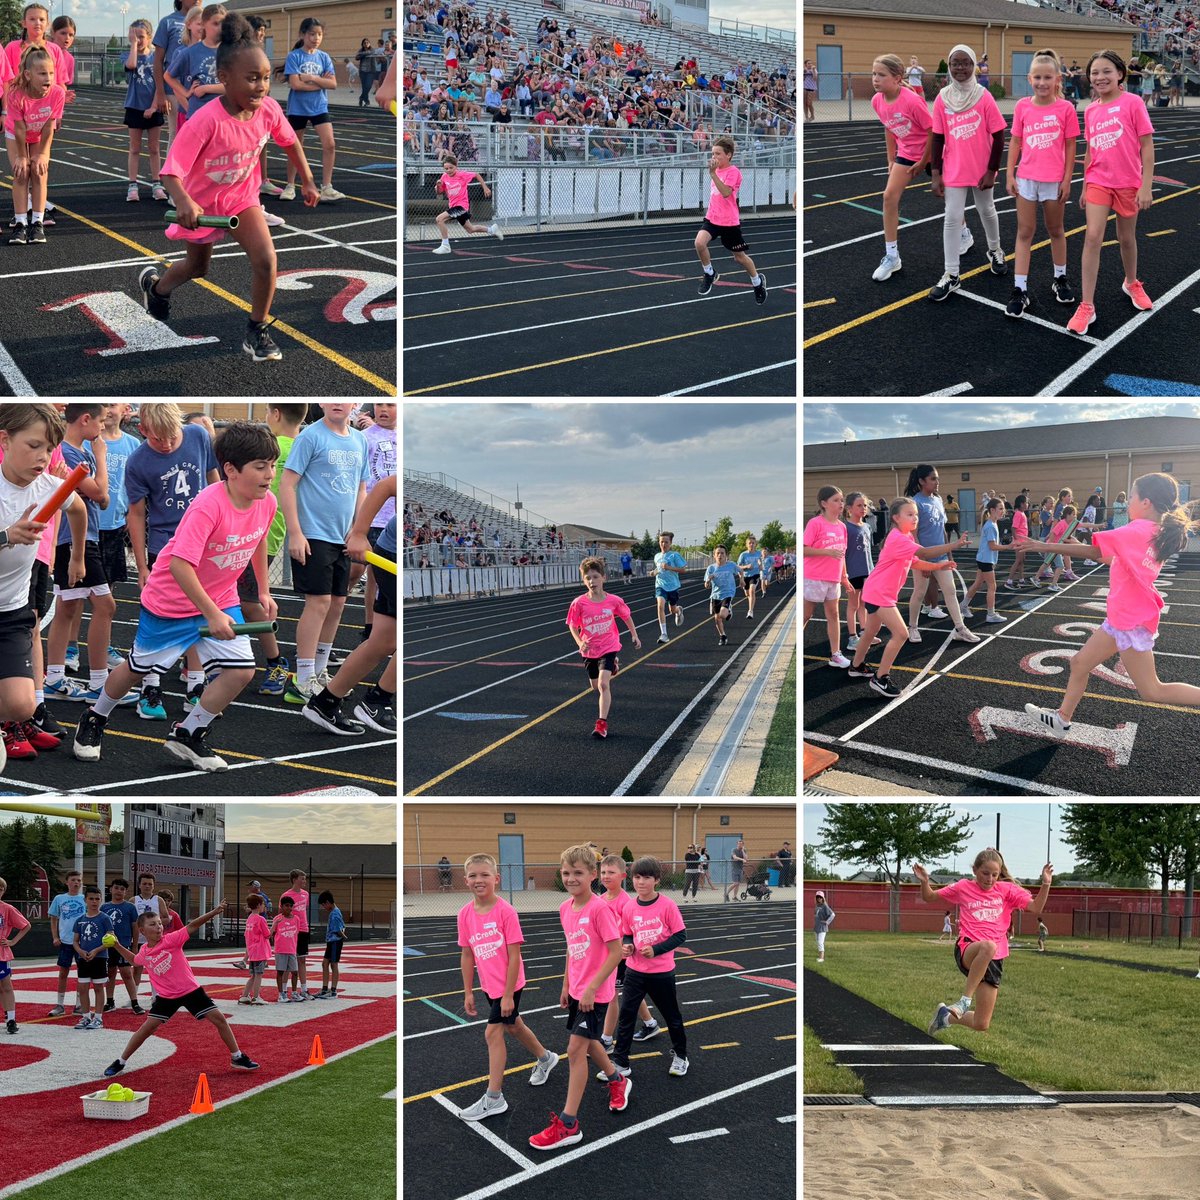 Beautiful night for our 4th grade track meet with GES, SES, and TCE. Appreciated all our Ts that volunteered. Big thx to our coaches @FCEhse: Mr. Marquardt and Mrs. Henney. Way to go #FCEfish Ss, amazing effort! #Yes, it looked like you had fun as well! 🤗